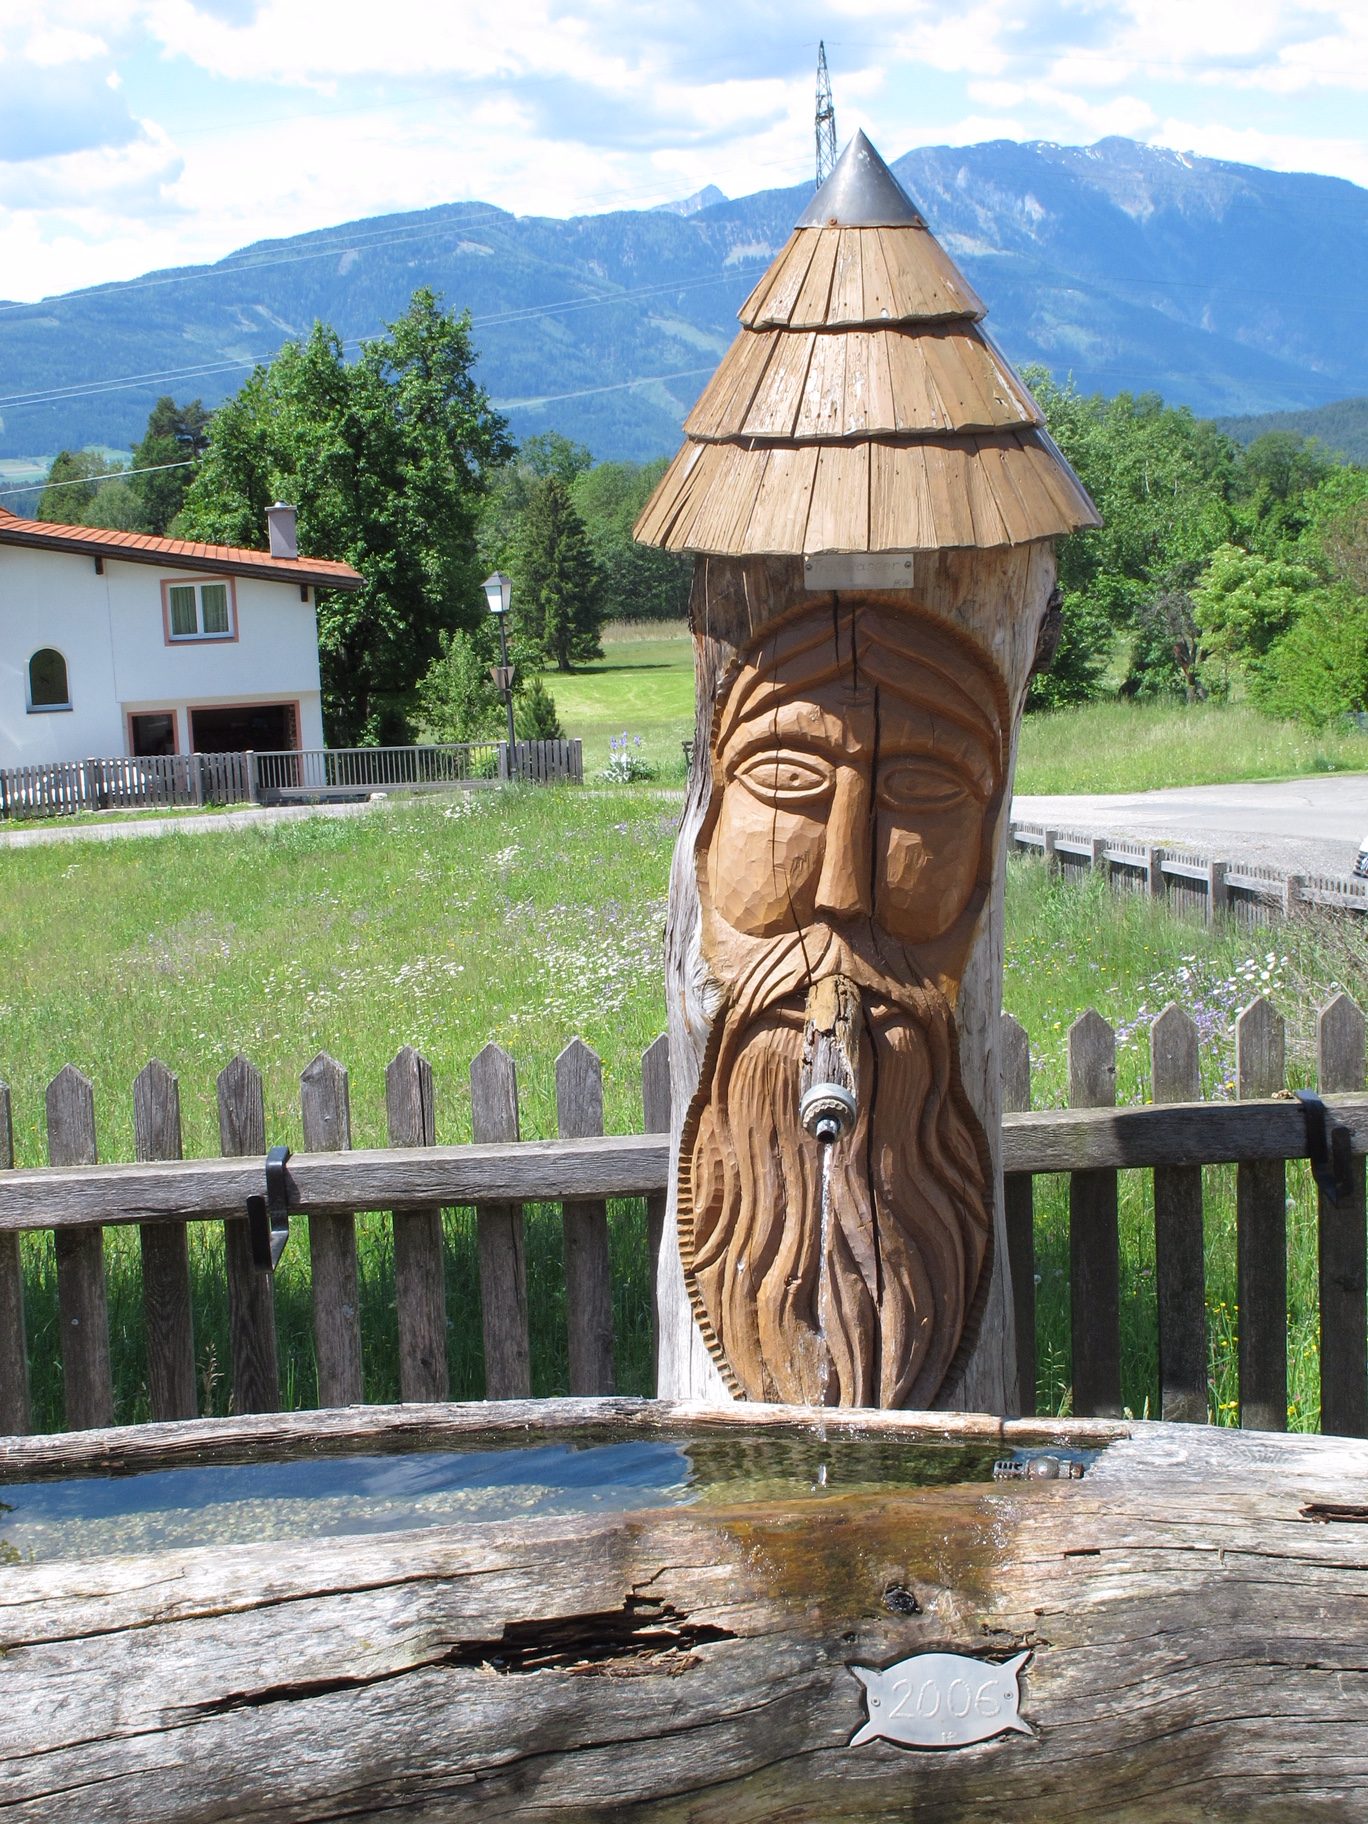 Austria: They do love their wood sculptures in Austria. Even a water trough.